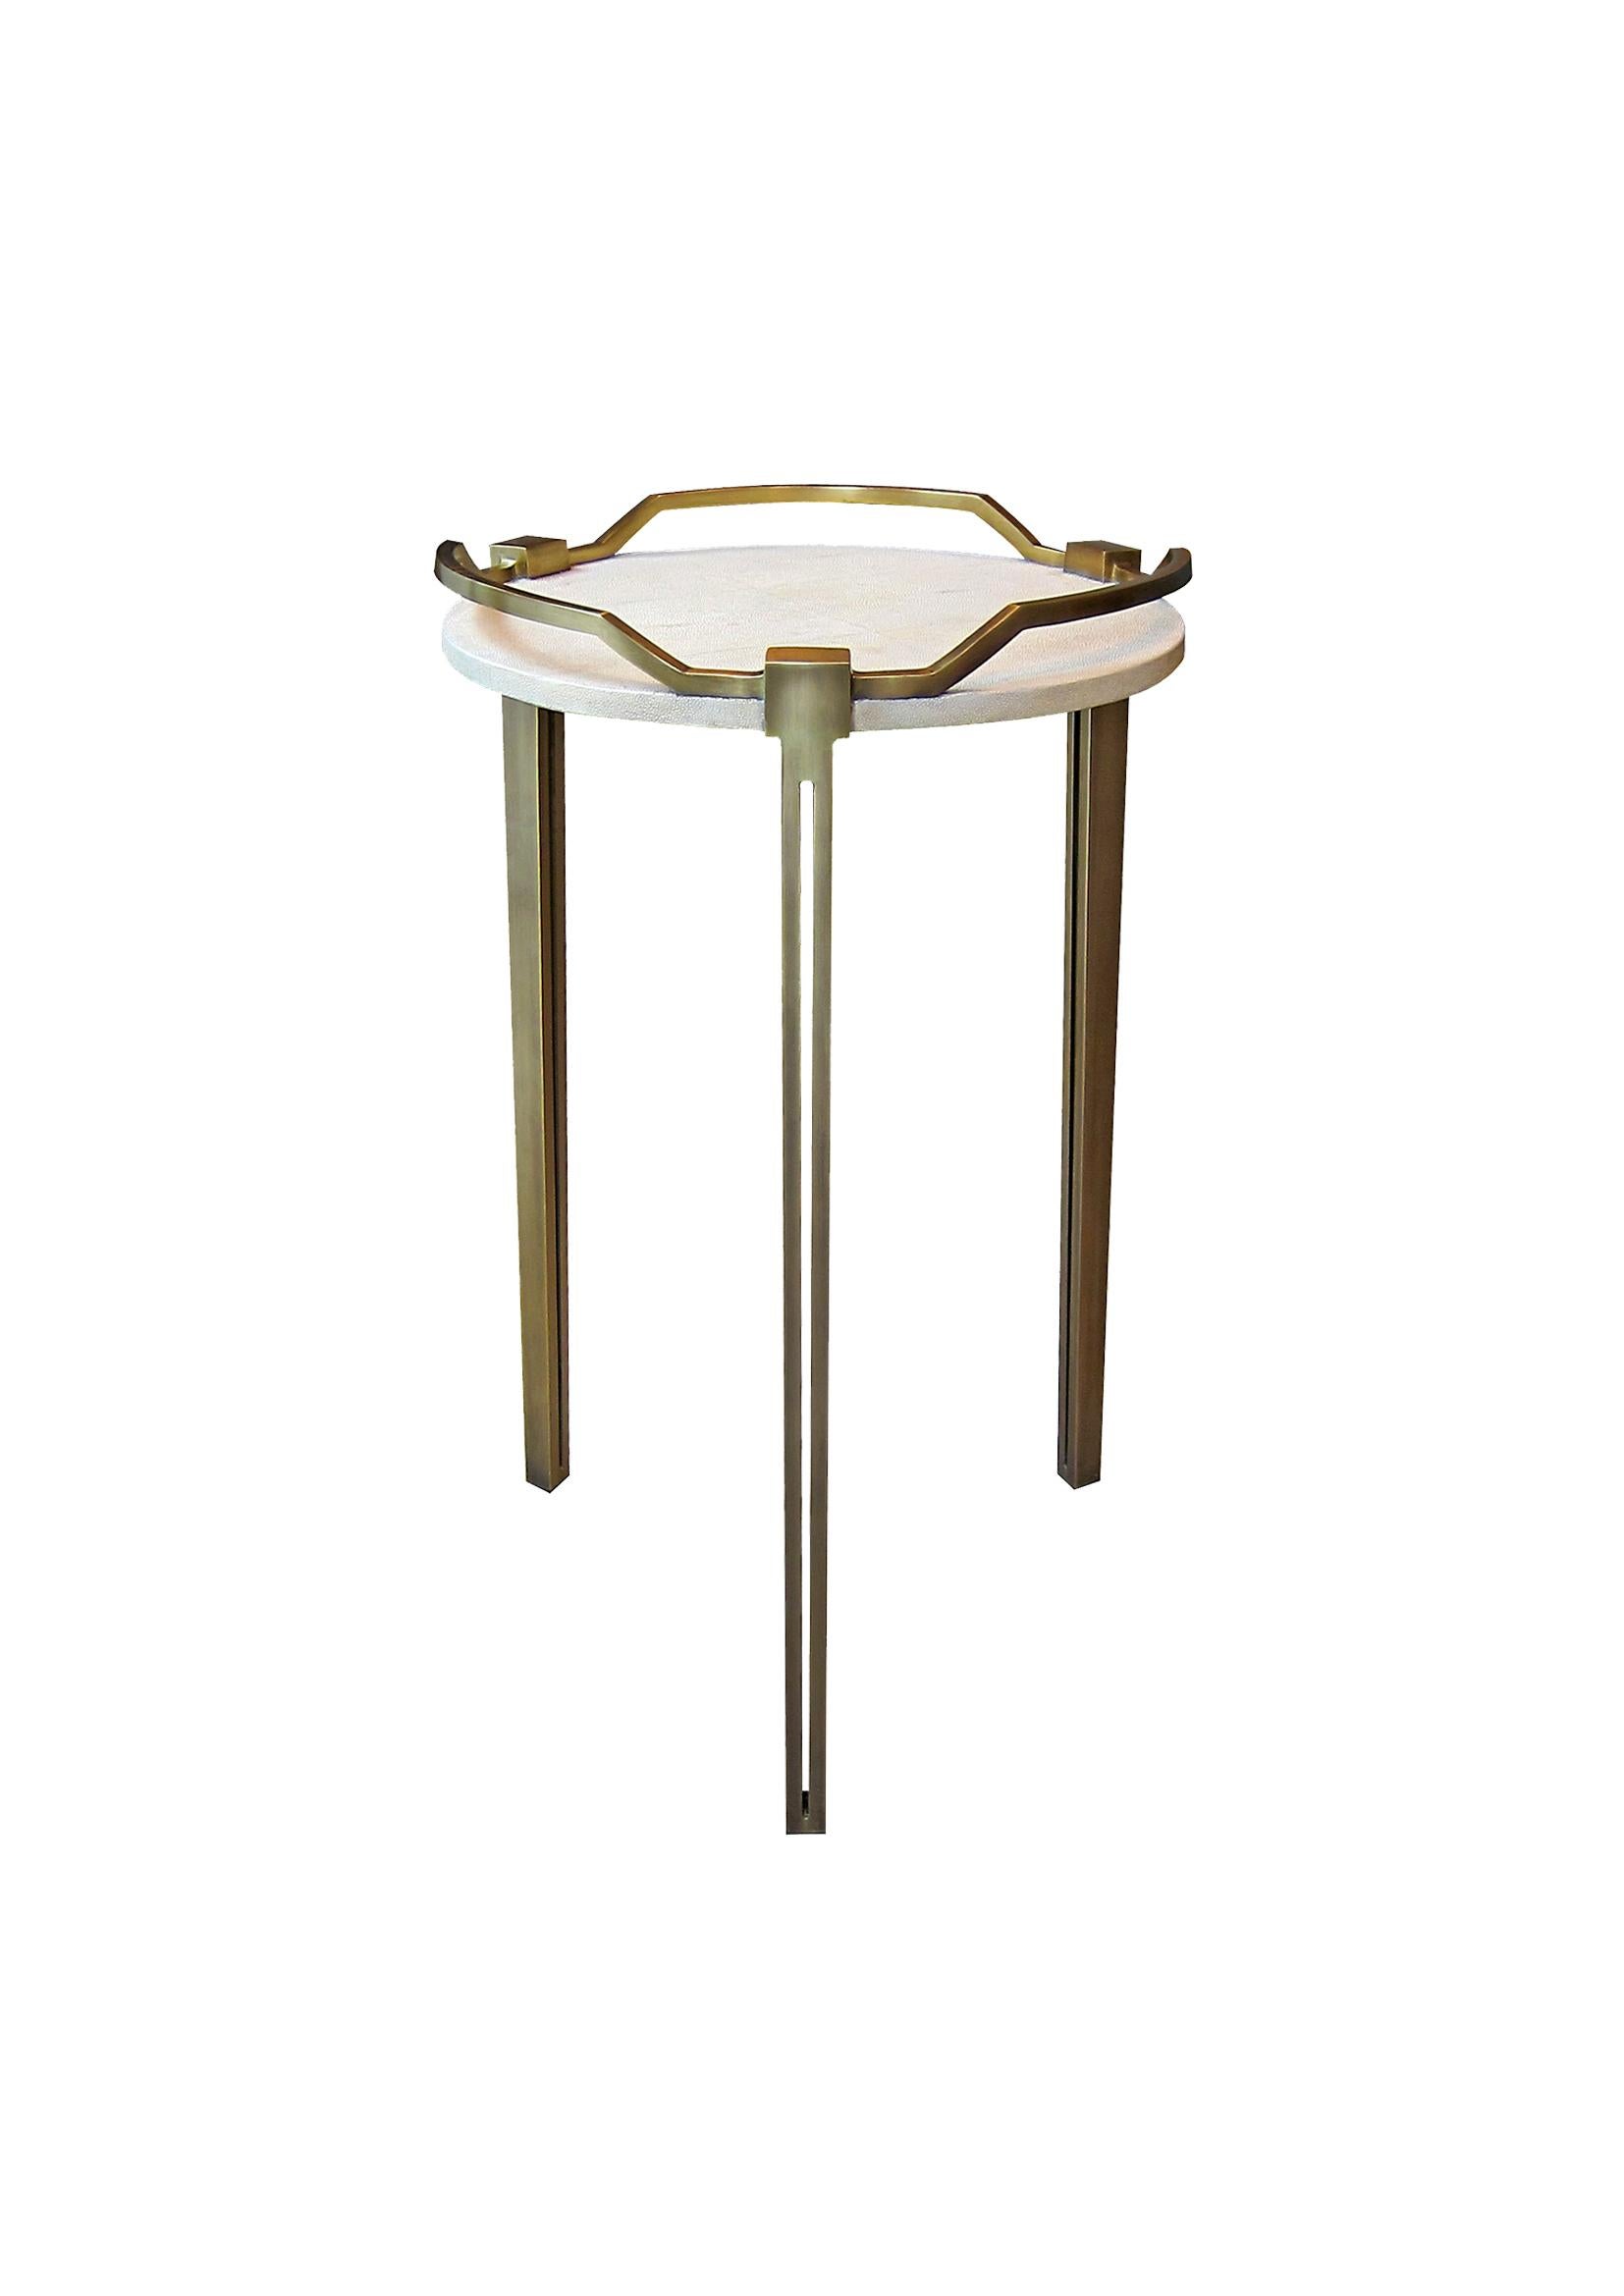 The Soho side table is the perfect piece for a living room, bedroom or office space that merges vintage and modern sensibility. The surface of this end table is inlaid in cream shagreen, framed with a raised bronze-patina brass handles that merge